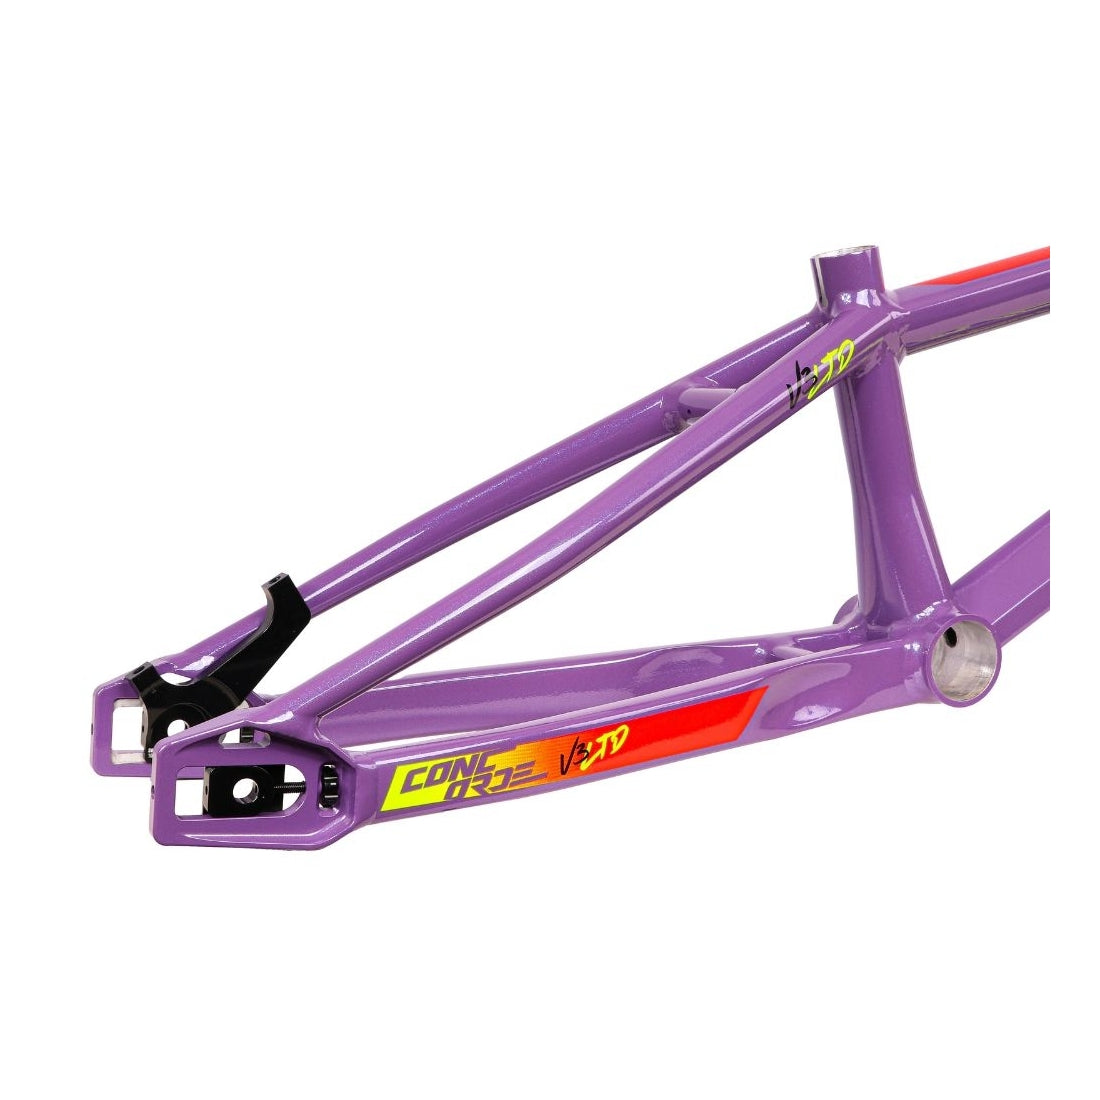 Purple Inspyre Concorde V3 Pro XXXL BMX Race frame with yellow and red decals.